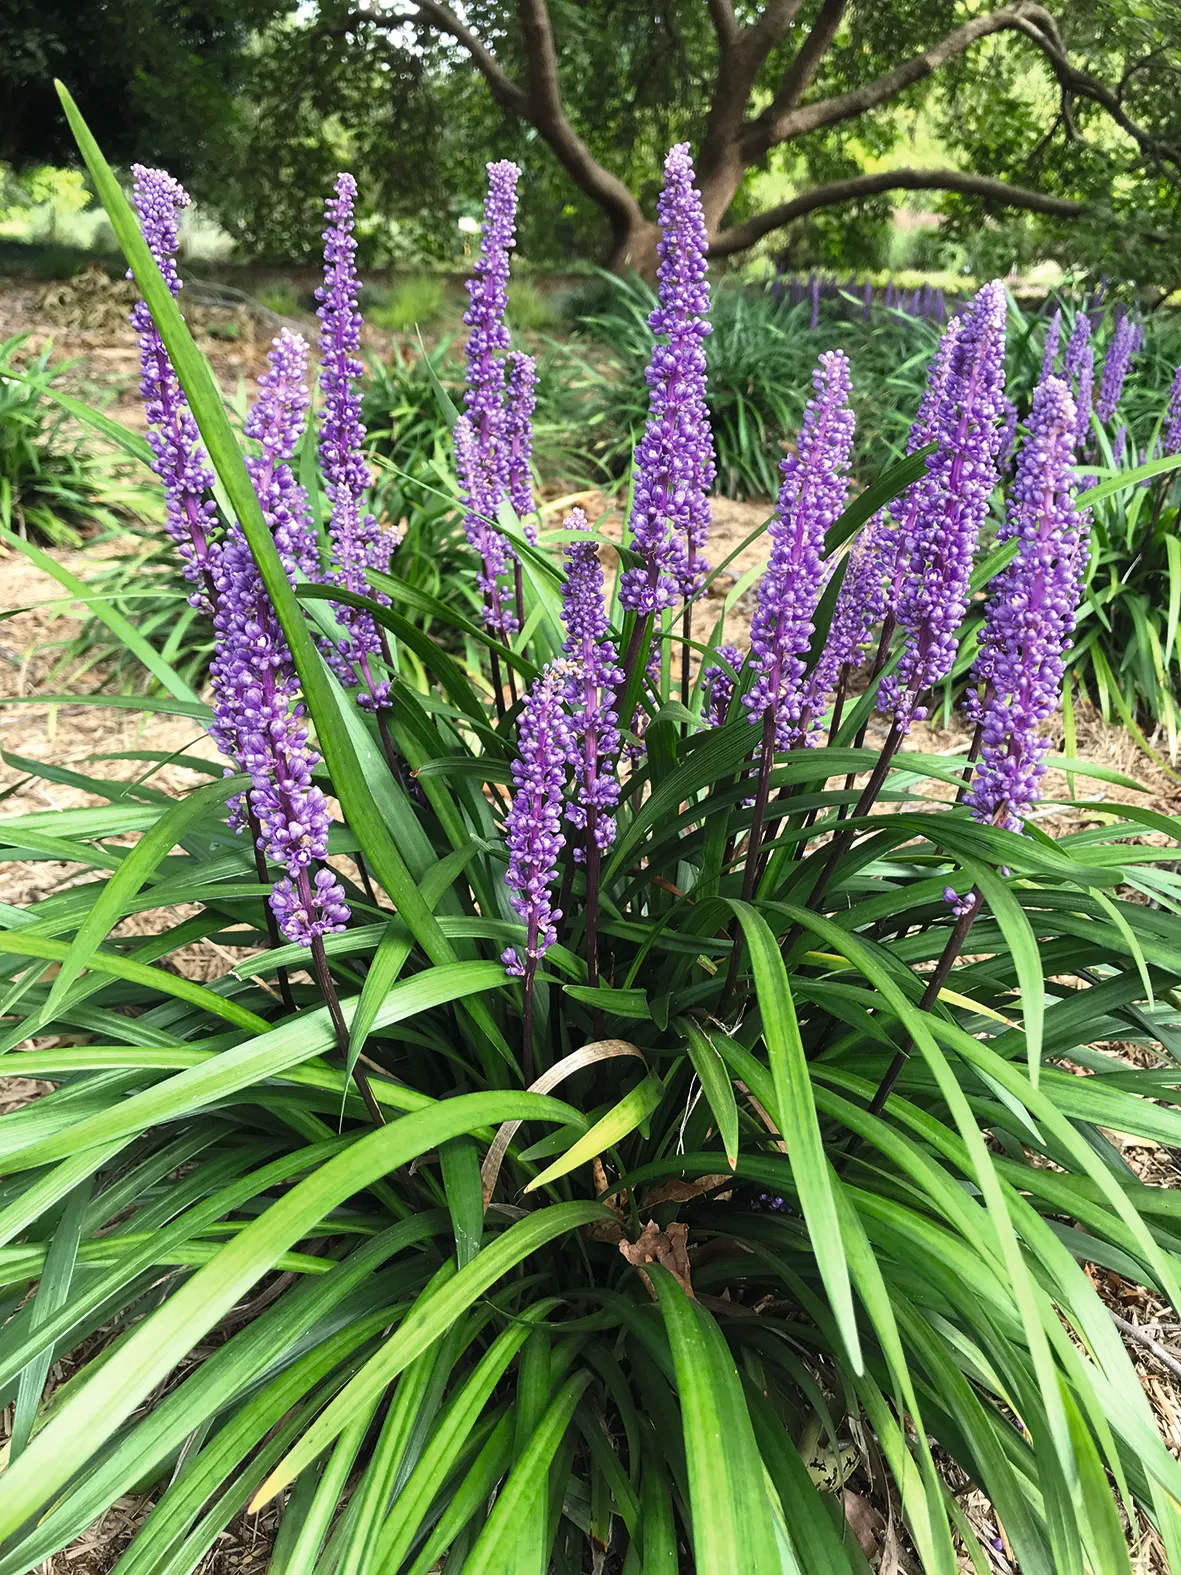 Plant this hardy evergreen perennial, Liriope muscari, for pillars of bluepurple blooms every autumn